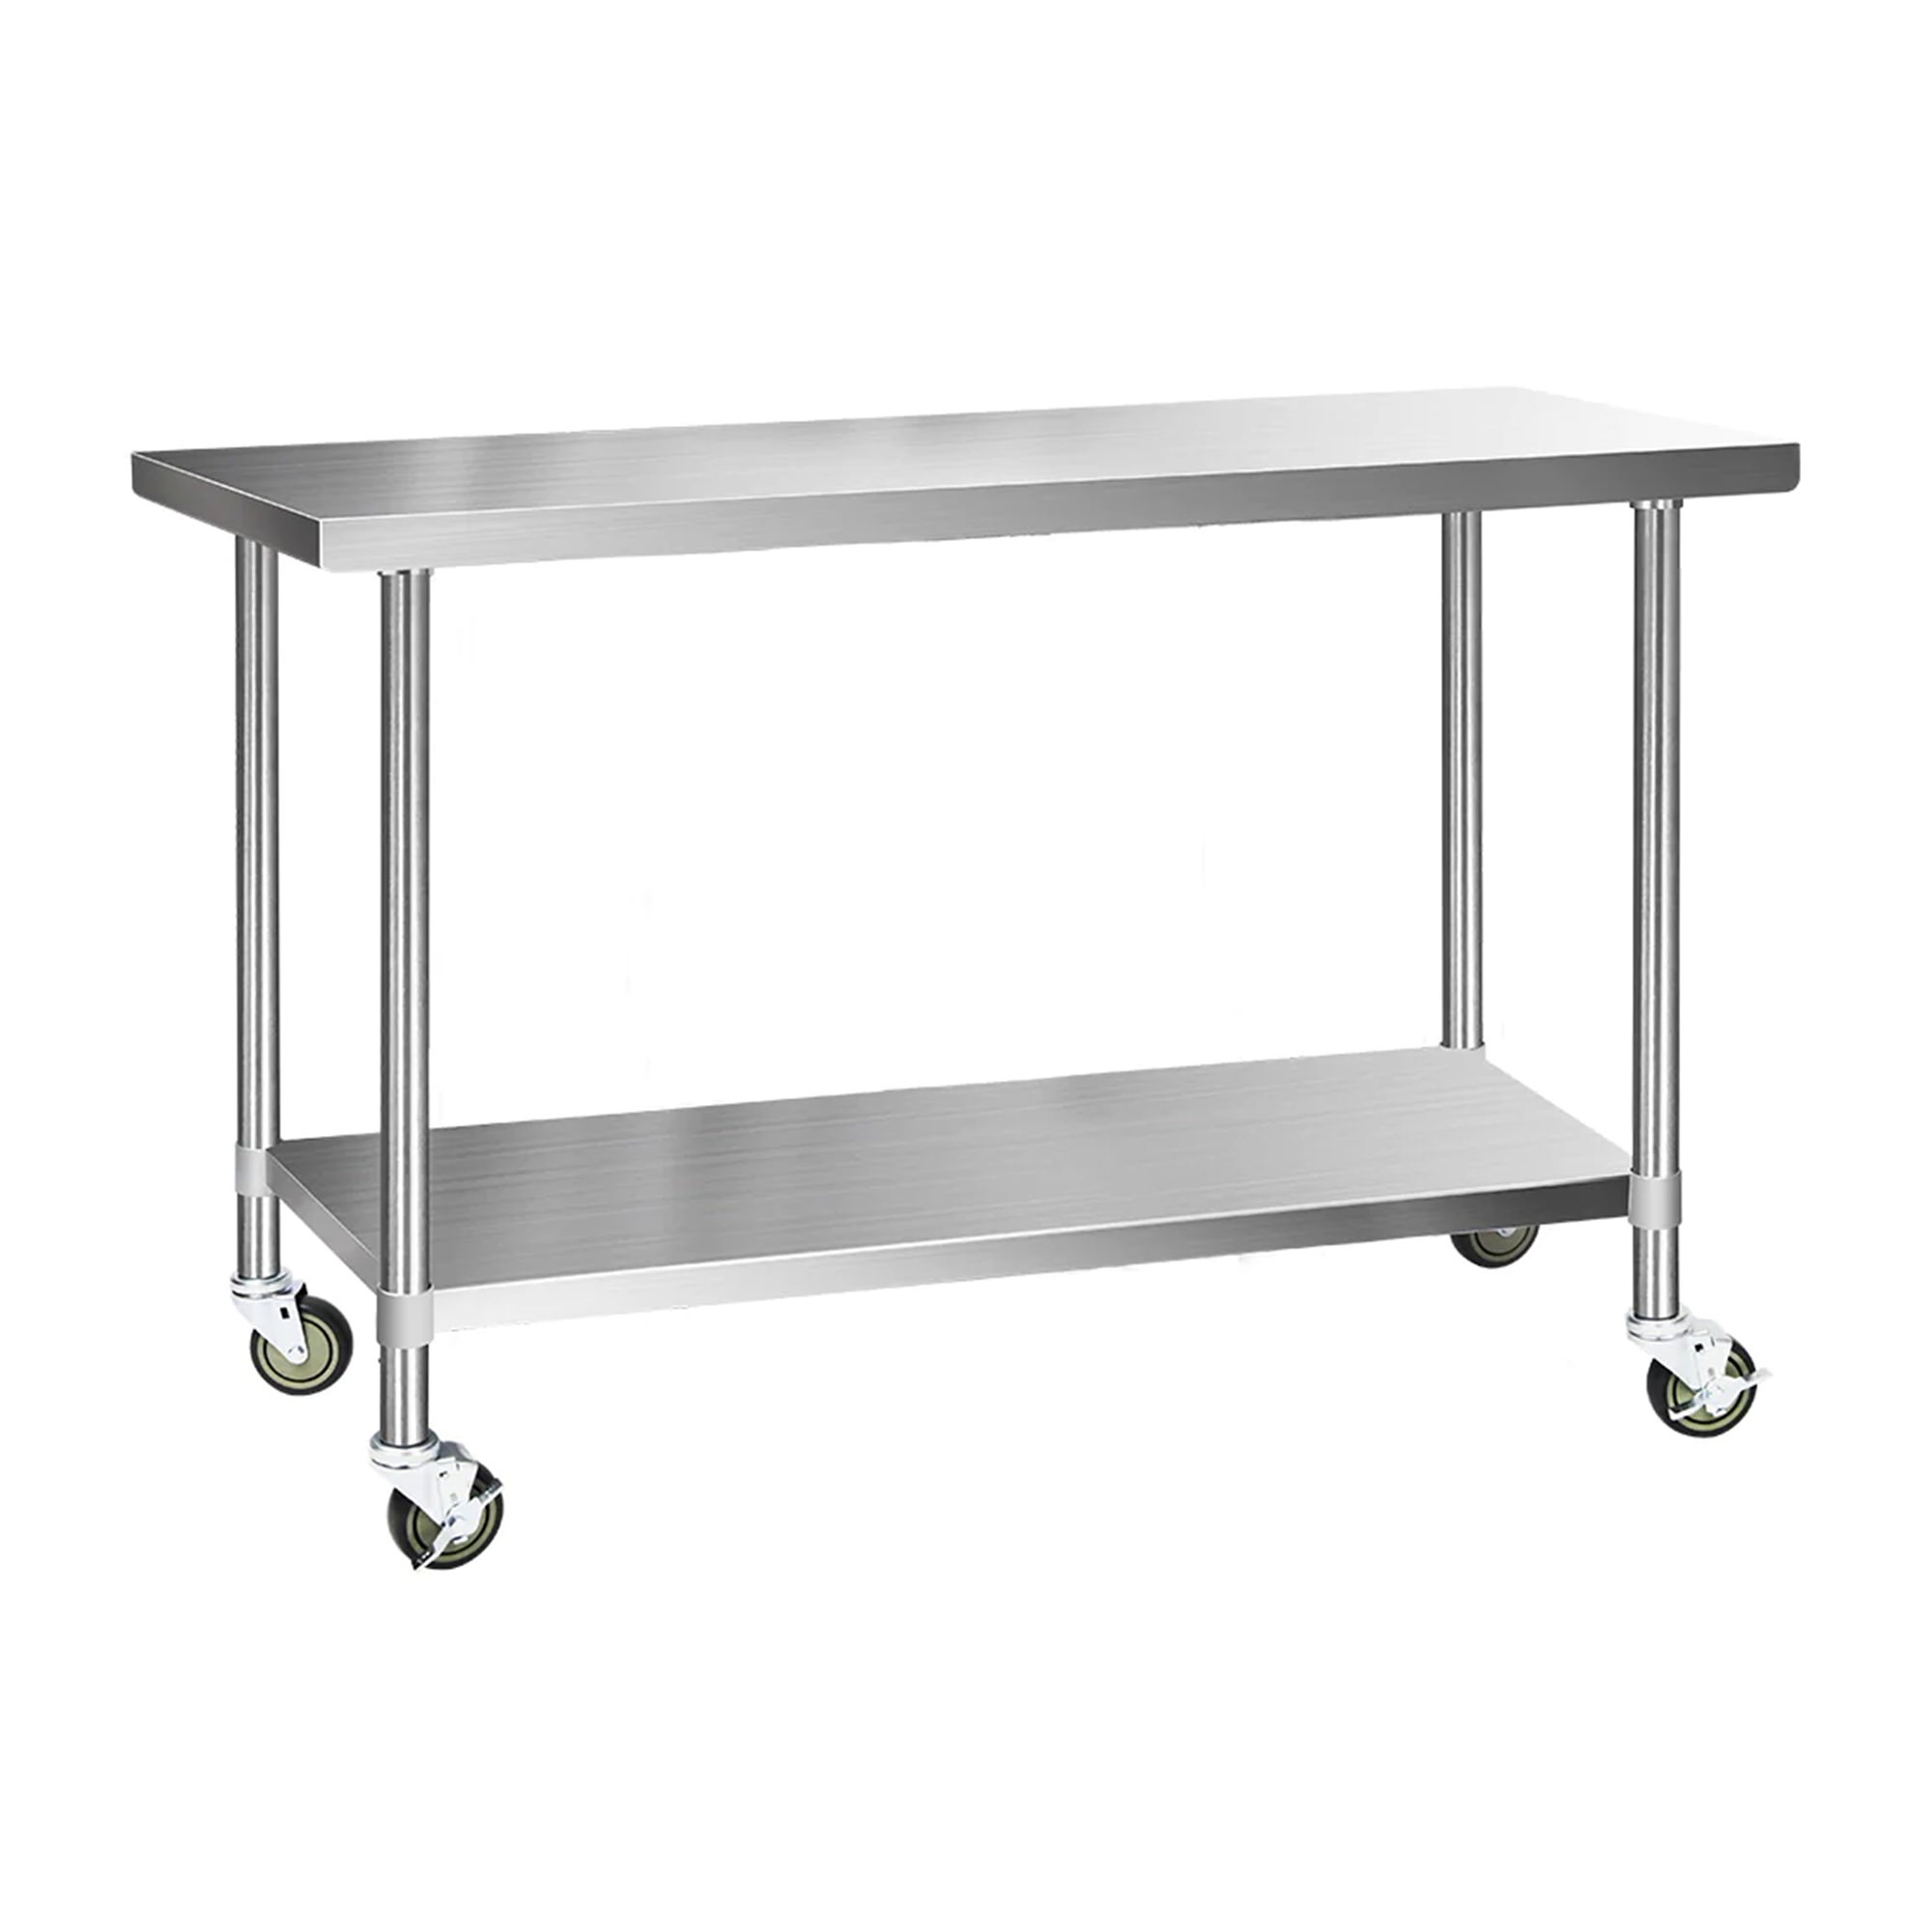 Cefito 430 Stainless Steel Kitchen Bench with Wheels 152.4x61cm Image 1